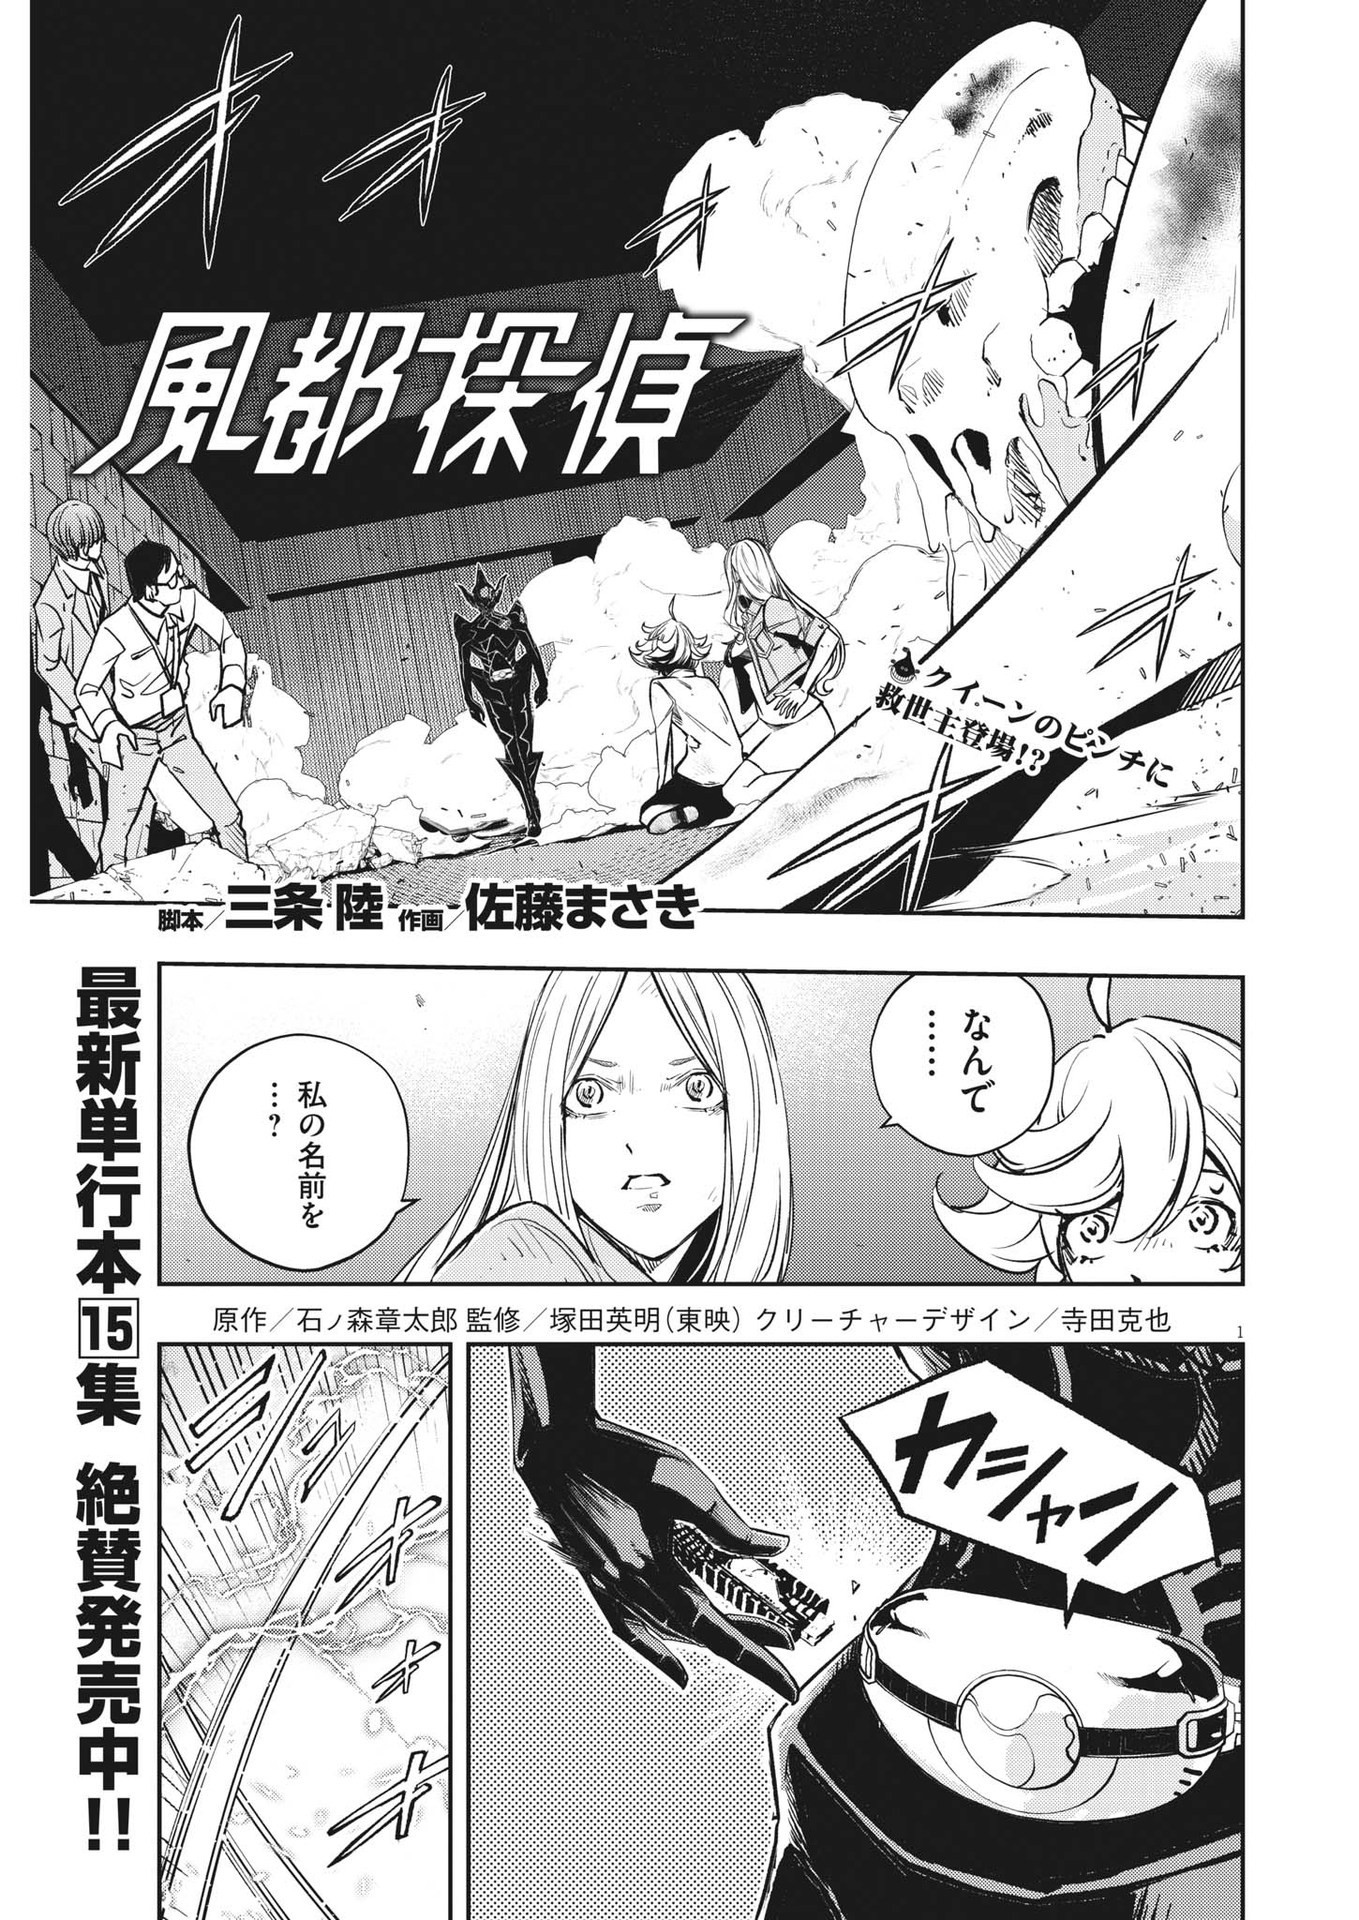 Kamen Rider W: Fuuto Tantei - Chapter 139 - Page 1